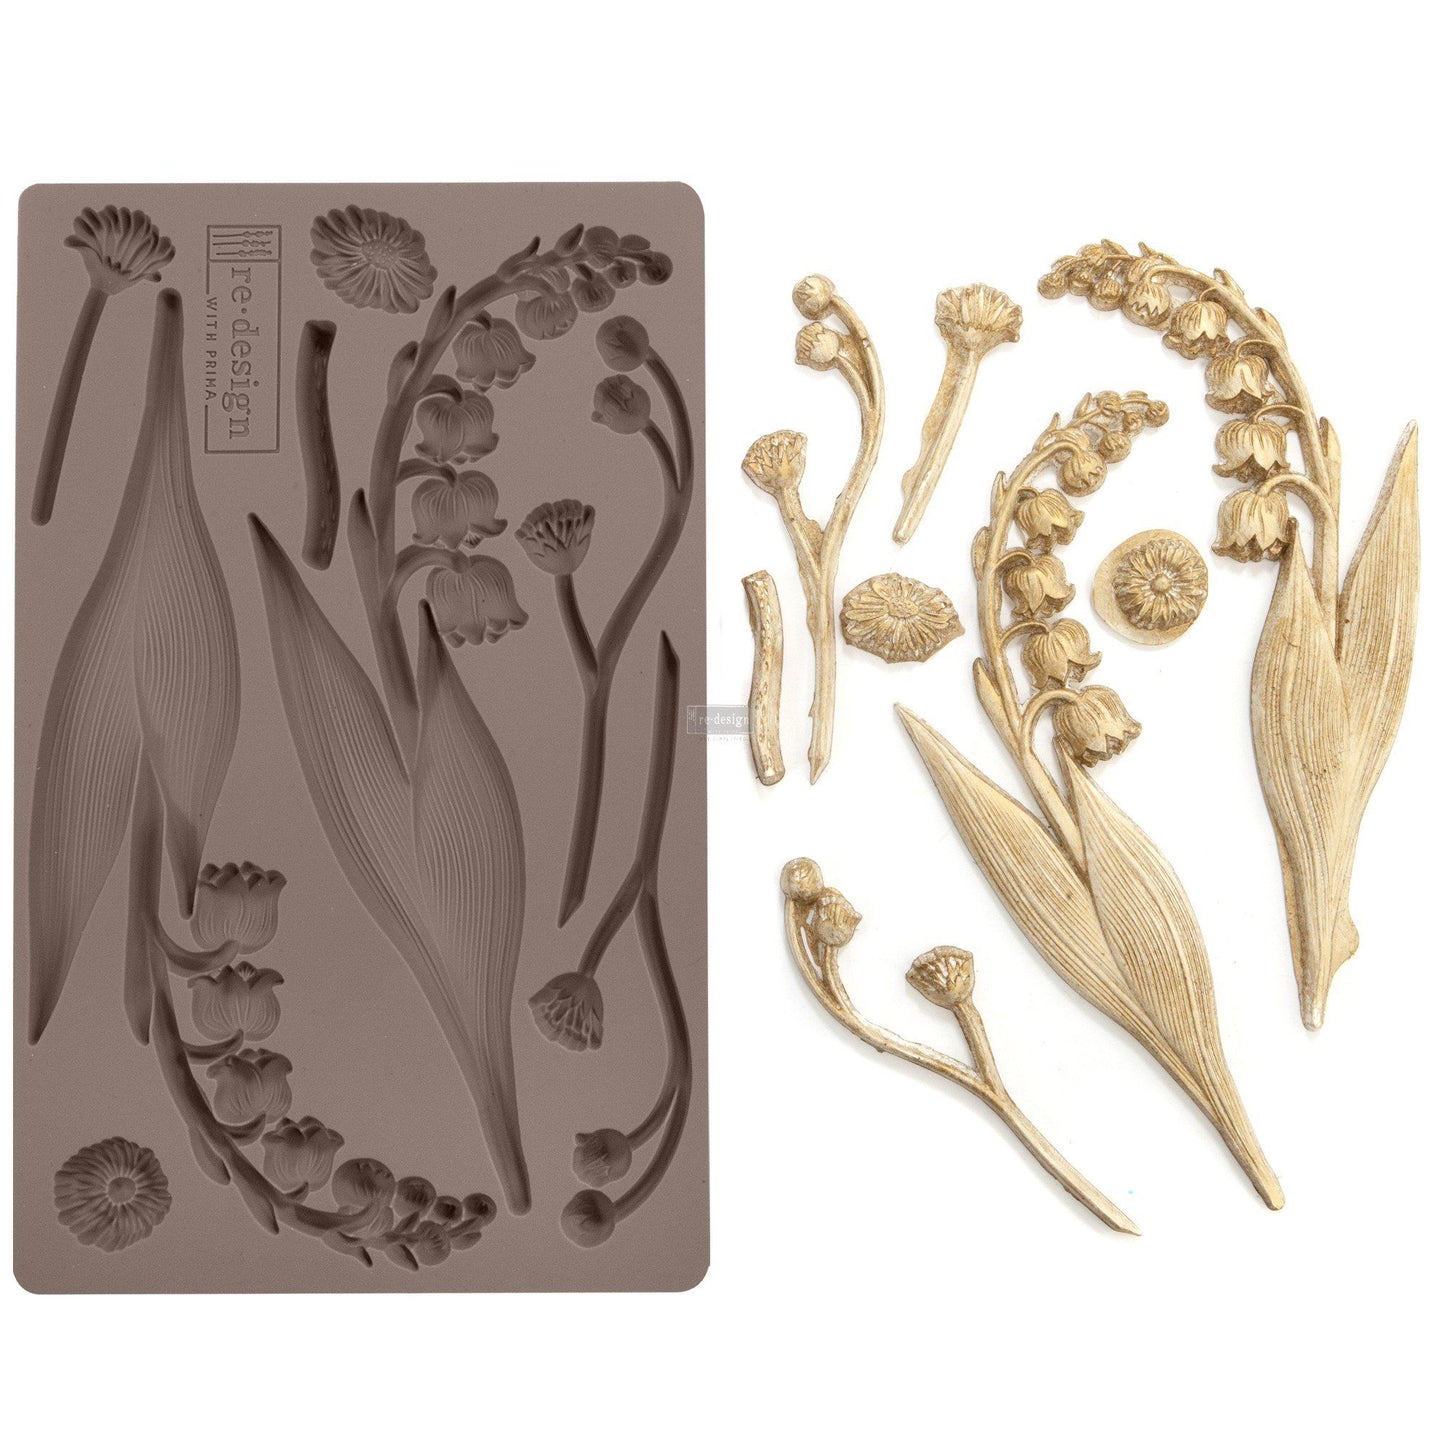 BELL ORCHIDS Decor Mould Re-Design with Prima 8" x 5"